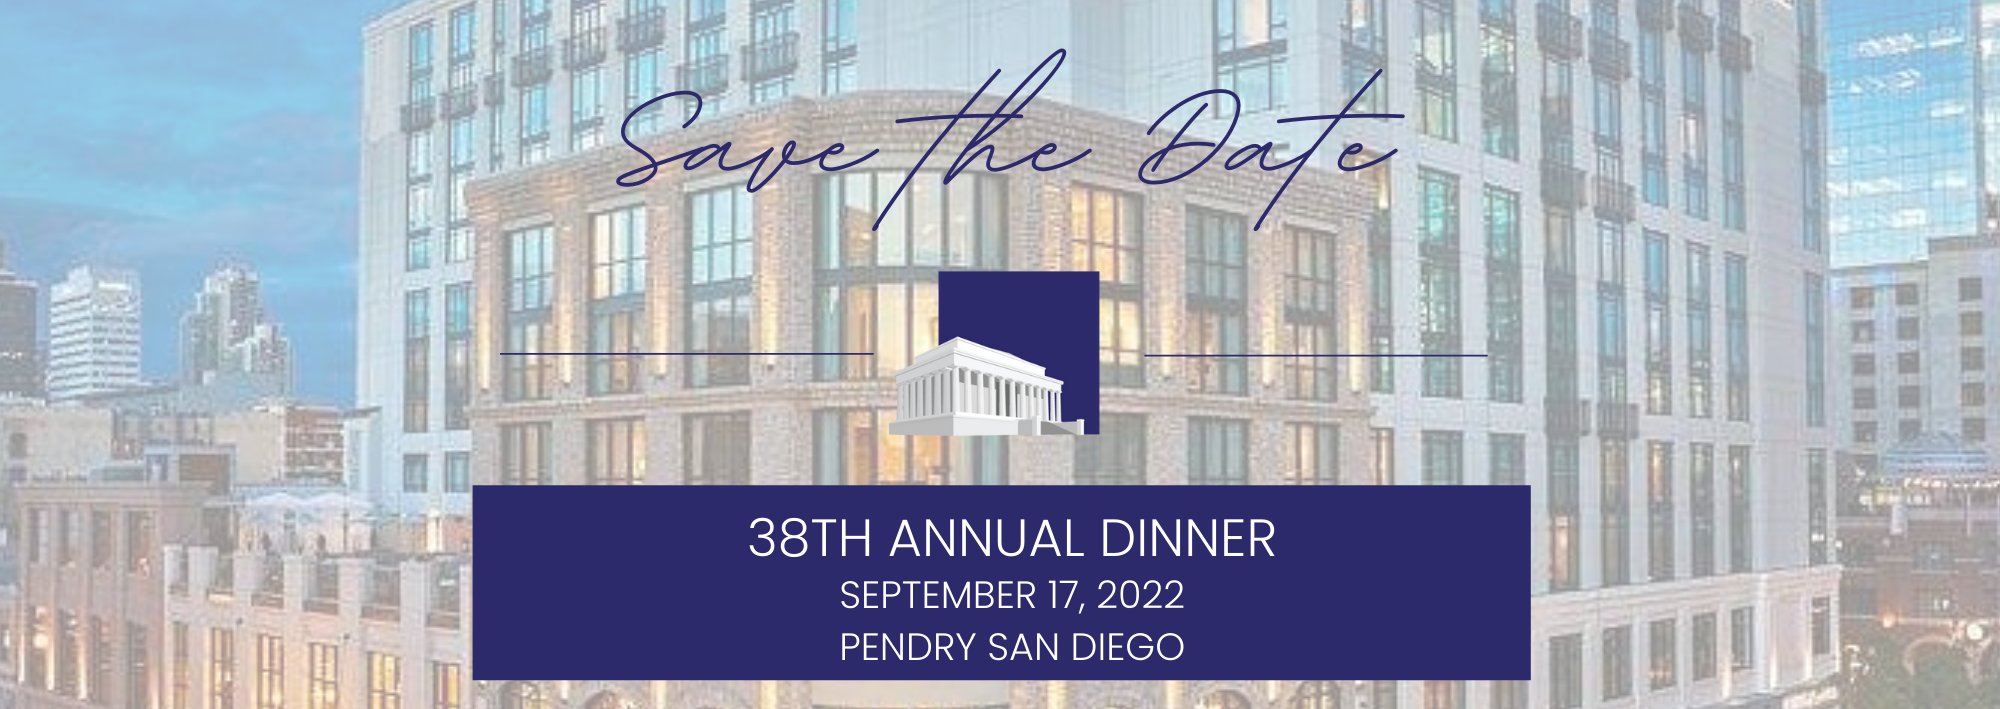 Copy of Annual Dinner Save the Date for website